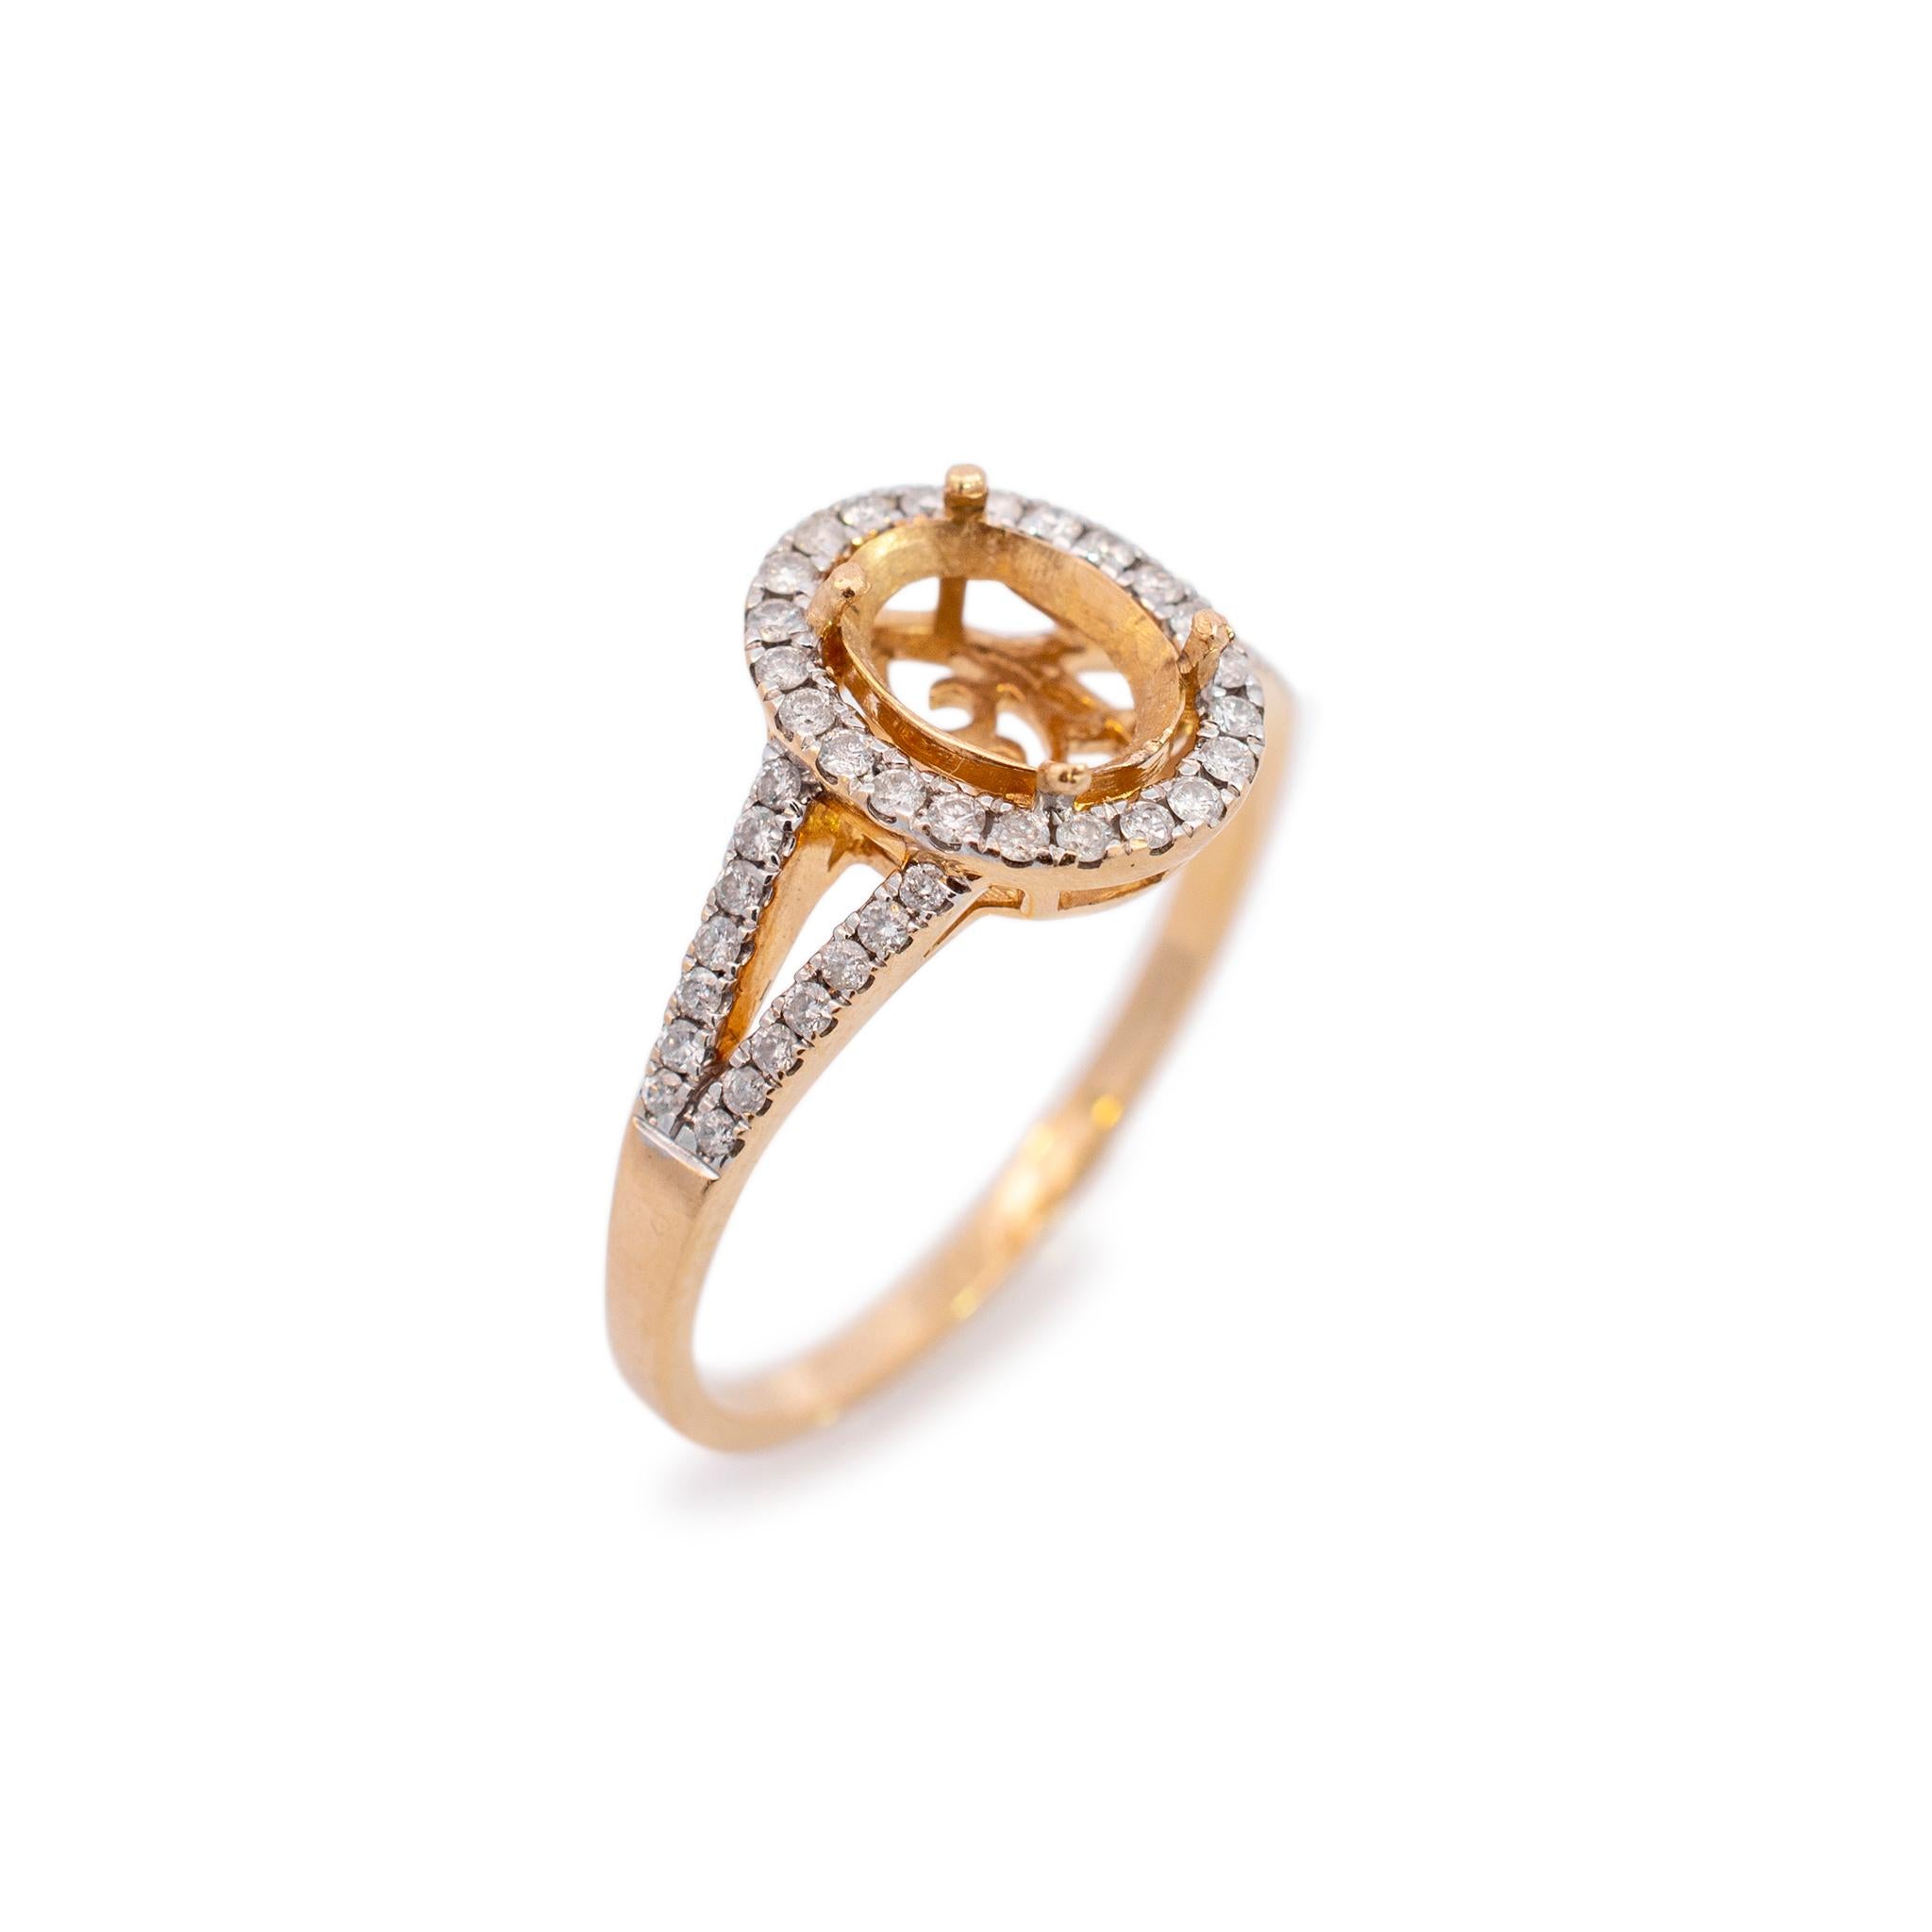 One lady's custom made polished 14K yellow gold, diamond halo, engagement, semi-mount ring with a half round shank. The ring is a size 8. The ring weighs a total of 2.90 grams. Engraved with 